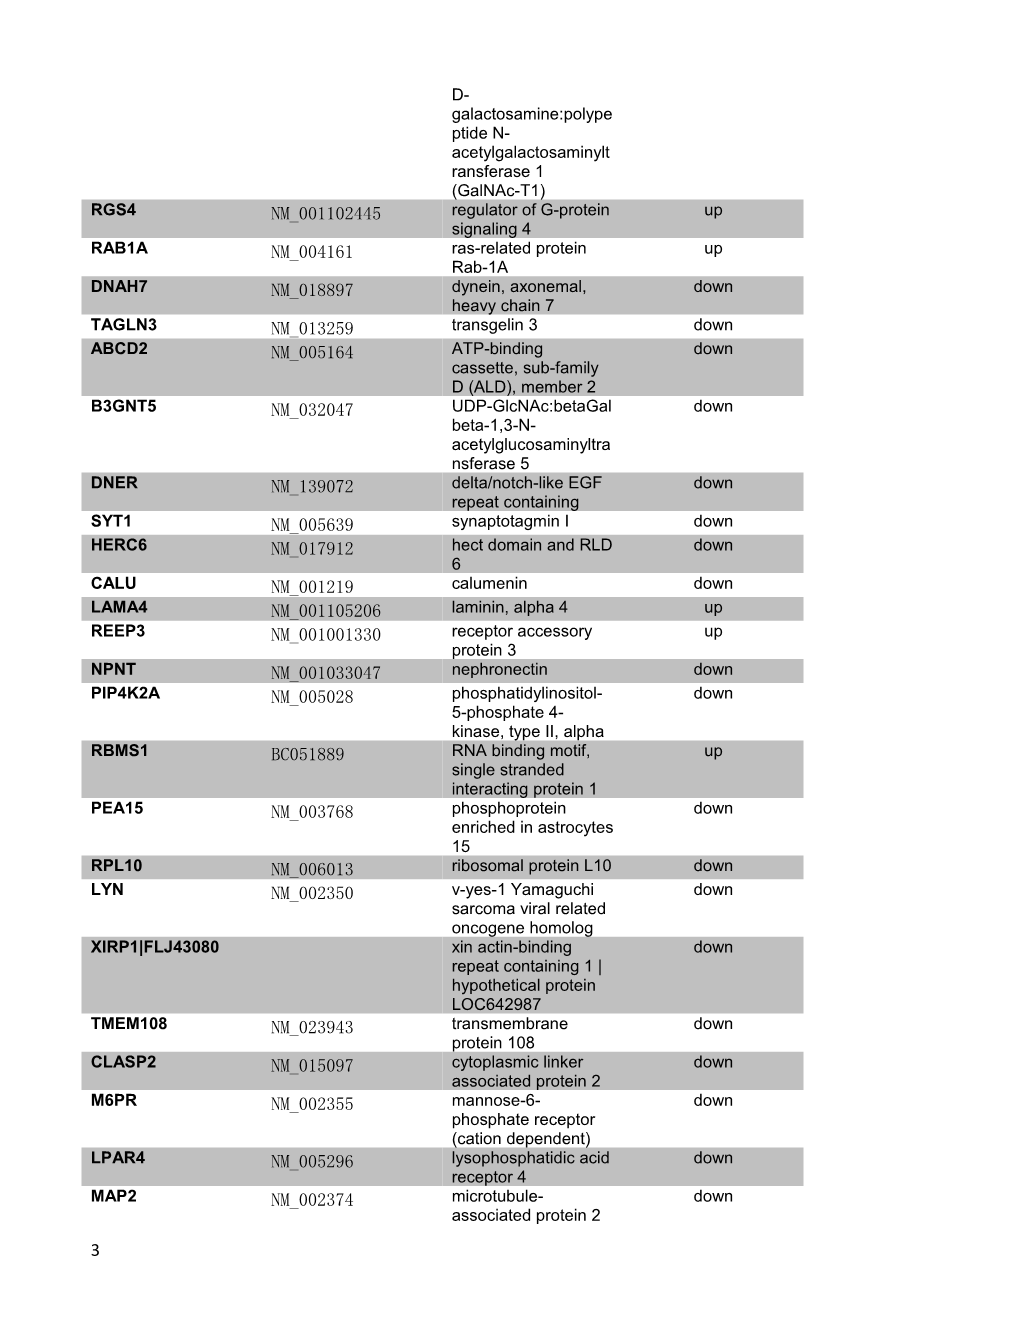 Supplementary Table 1: Knockdown of -Catenin in Astrocytes Alters Expression of 150 Genes